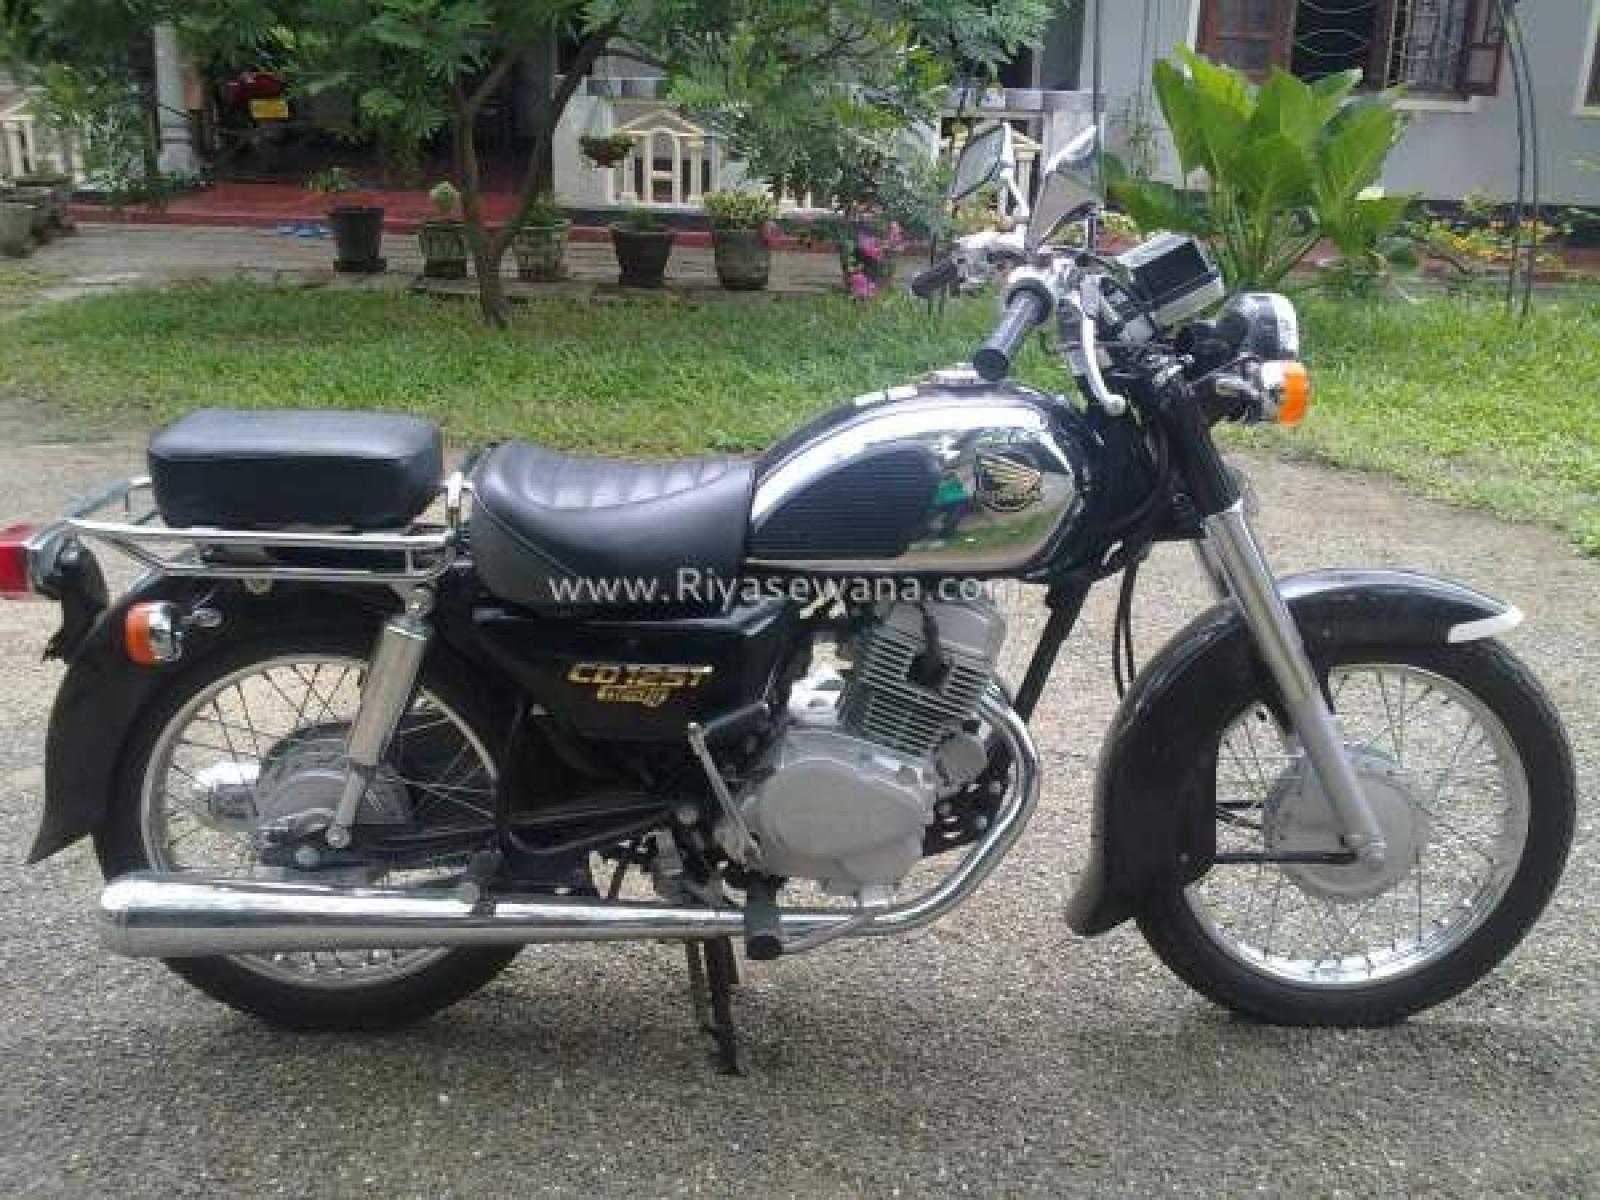 02 Honda Cd 125 T Benly Specs Images And Pricing